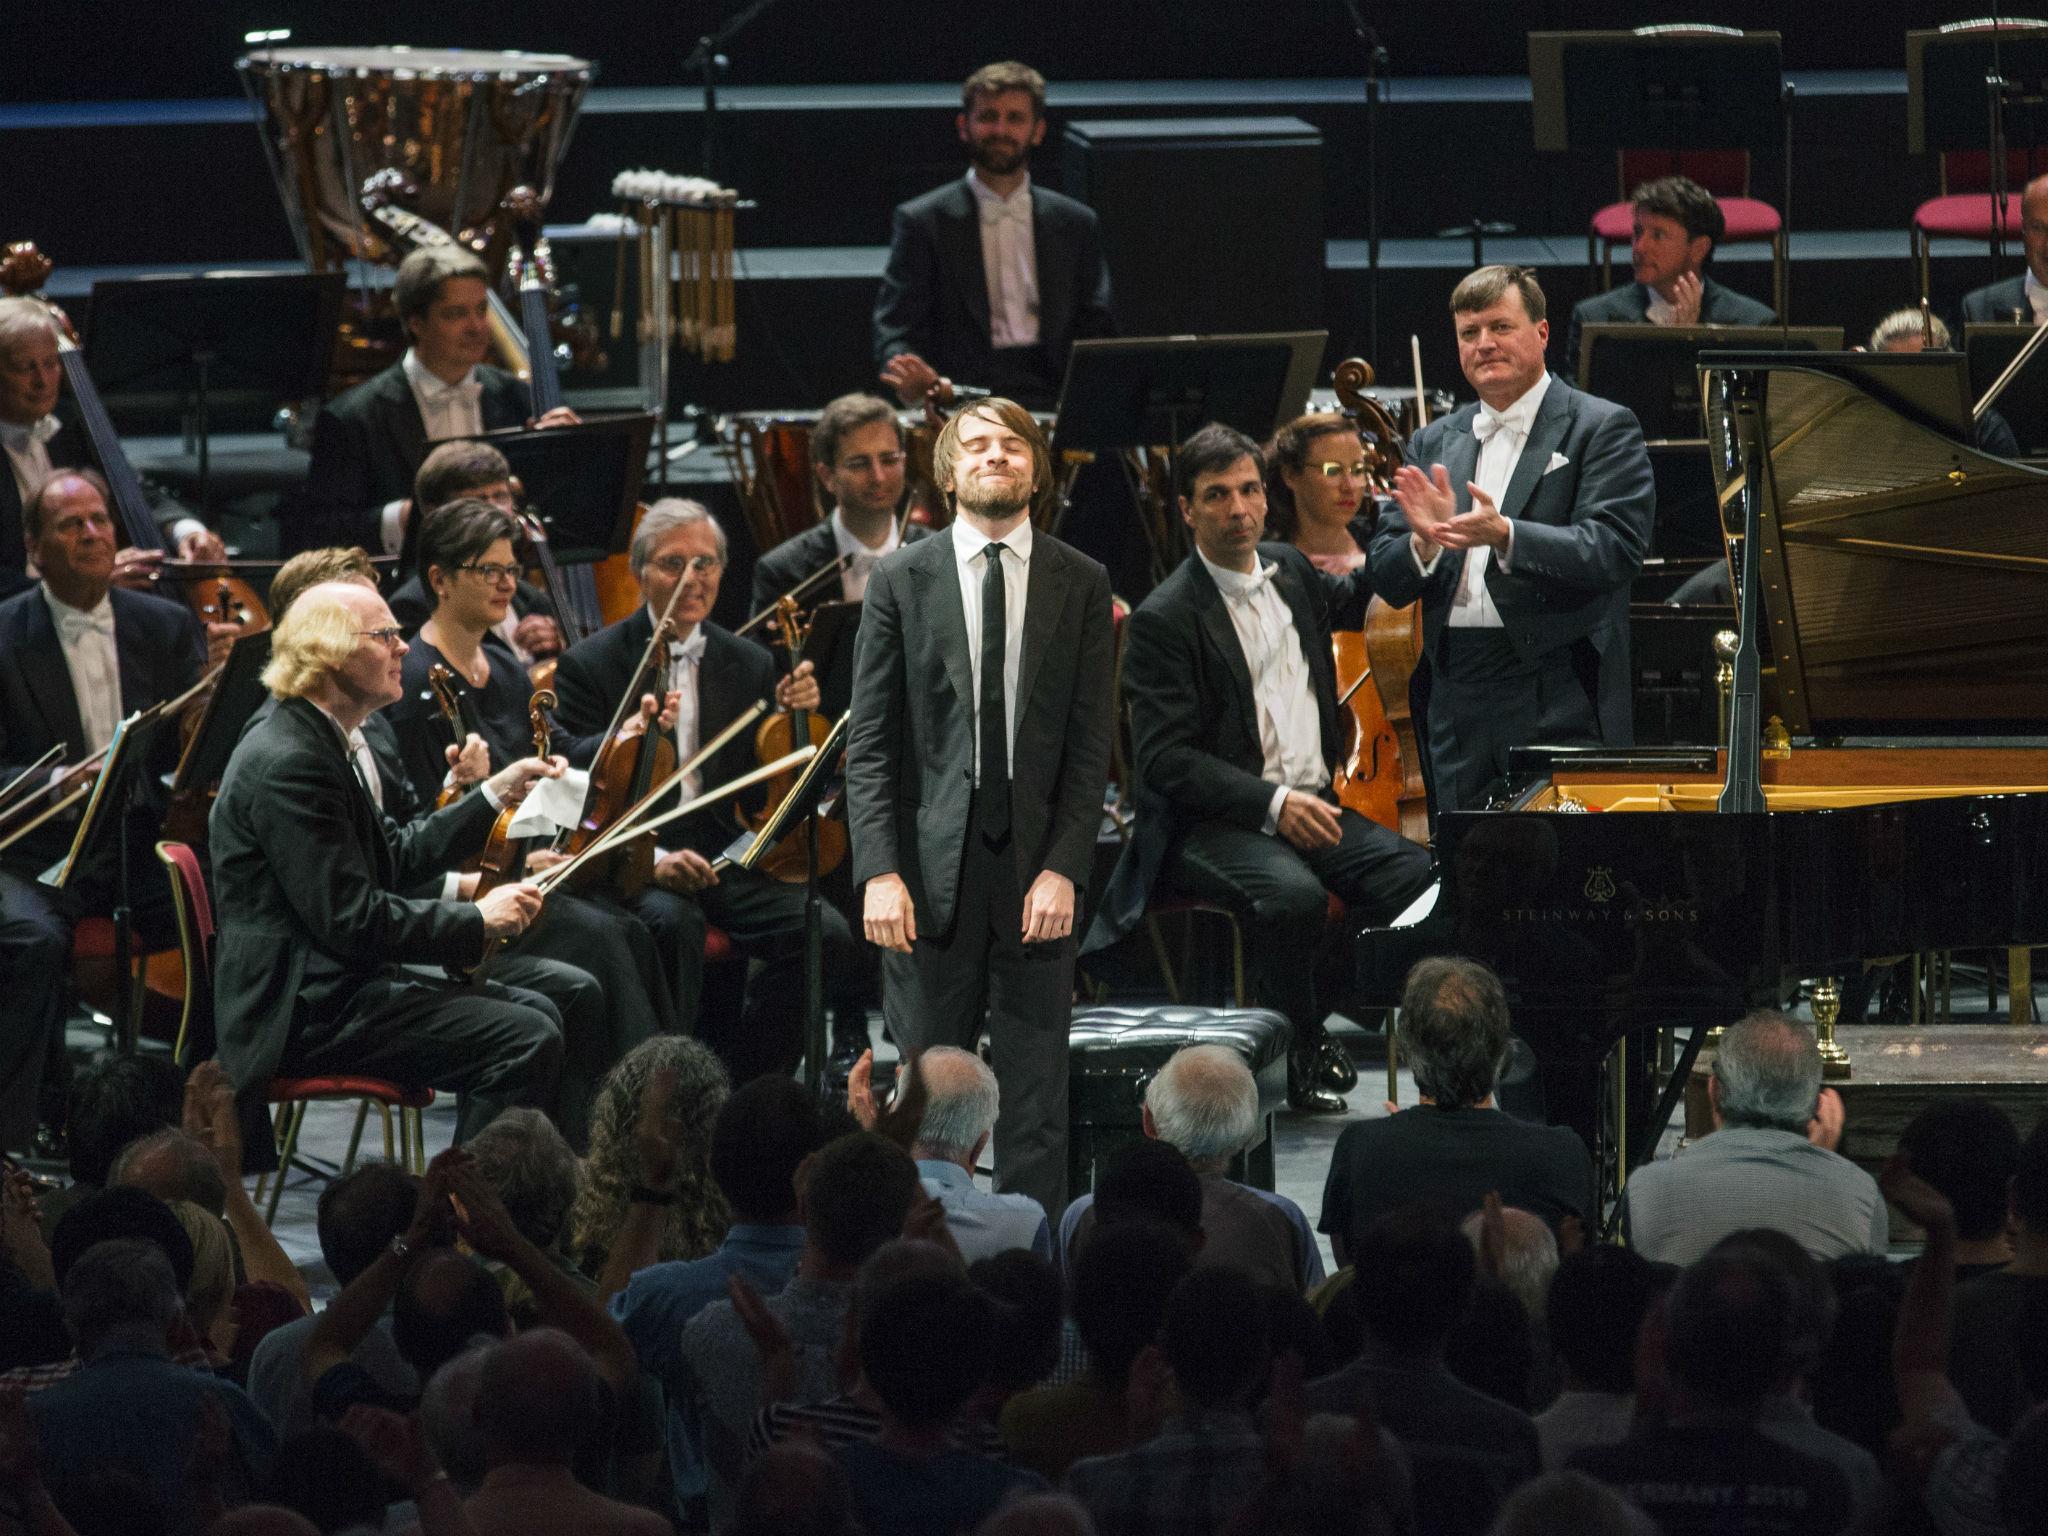 Pianist Daniil Trifonov performs with the Staatskapelle Dresden under the direction of Christian Thielemann